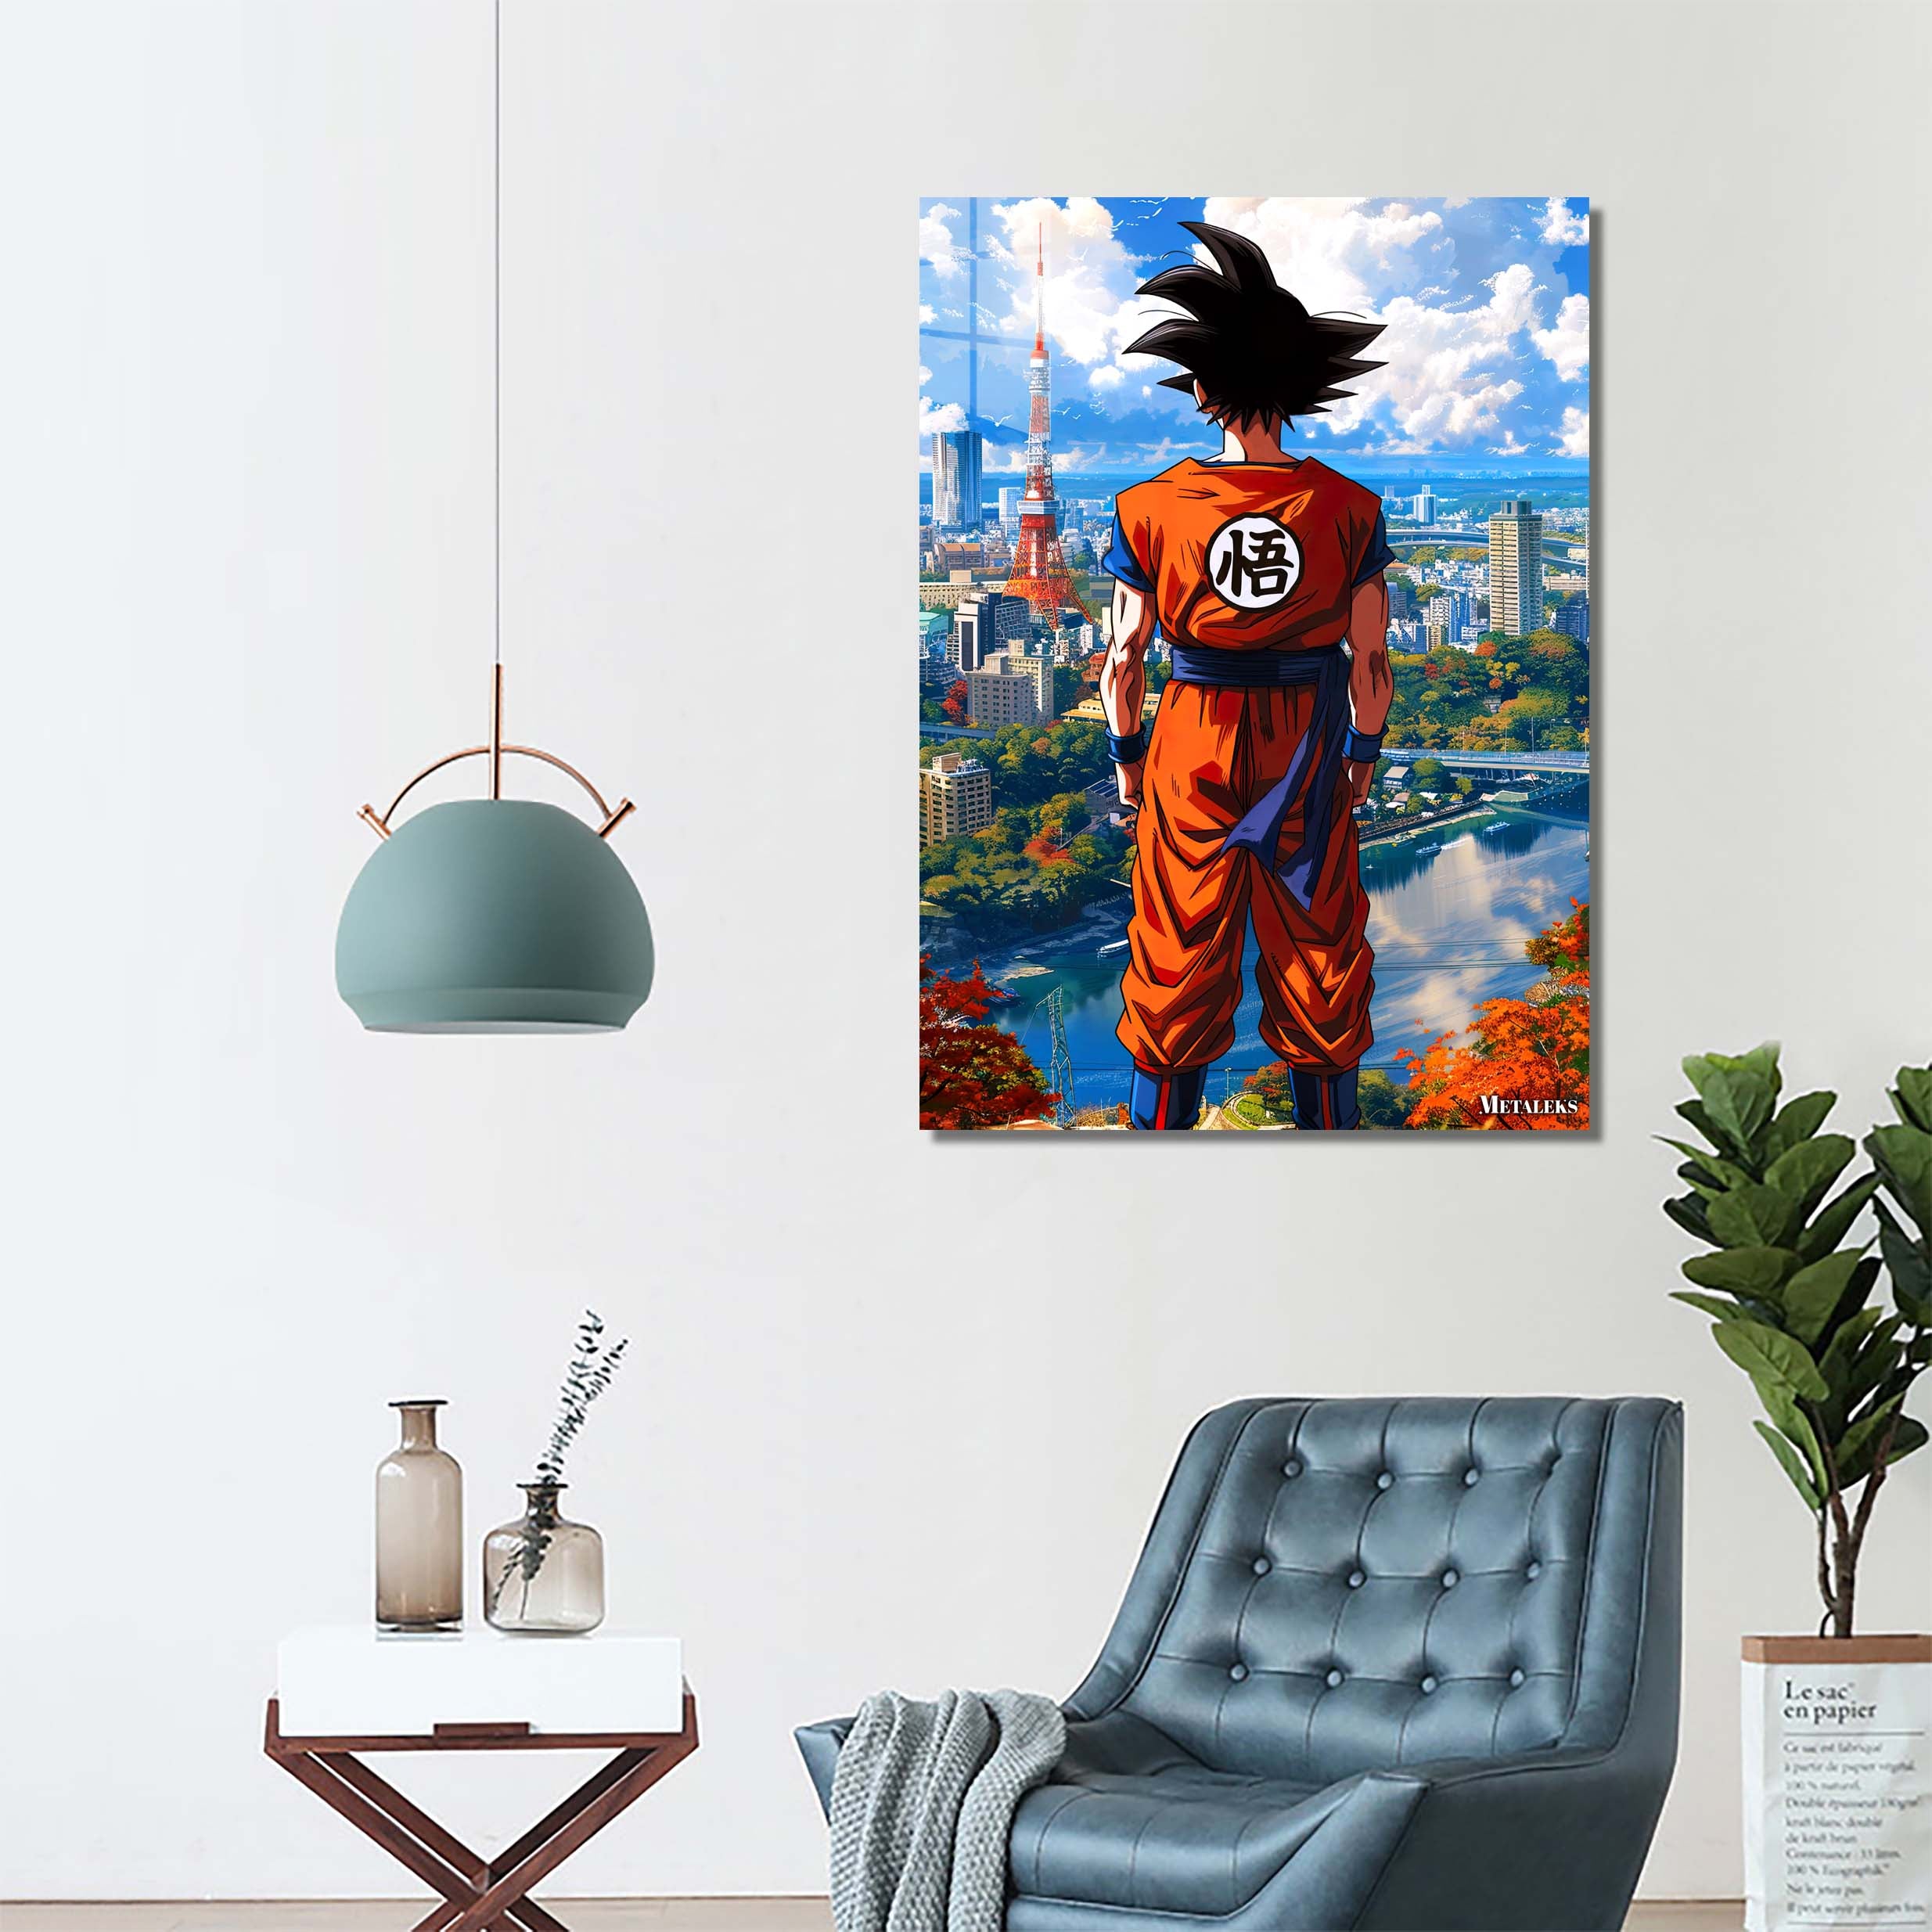 GOKU 2 anothermidjourney-designed by @An other Mid journey